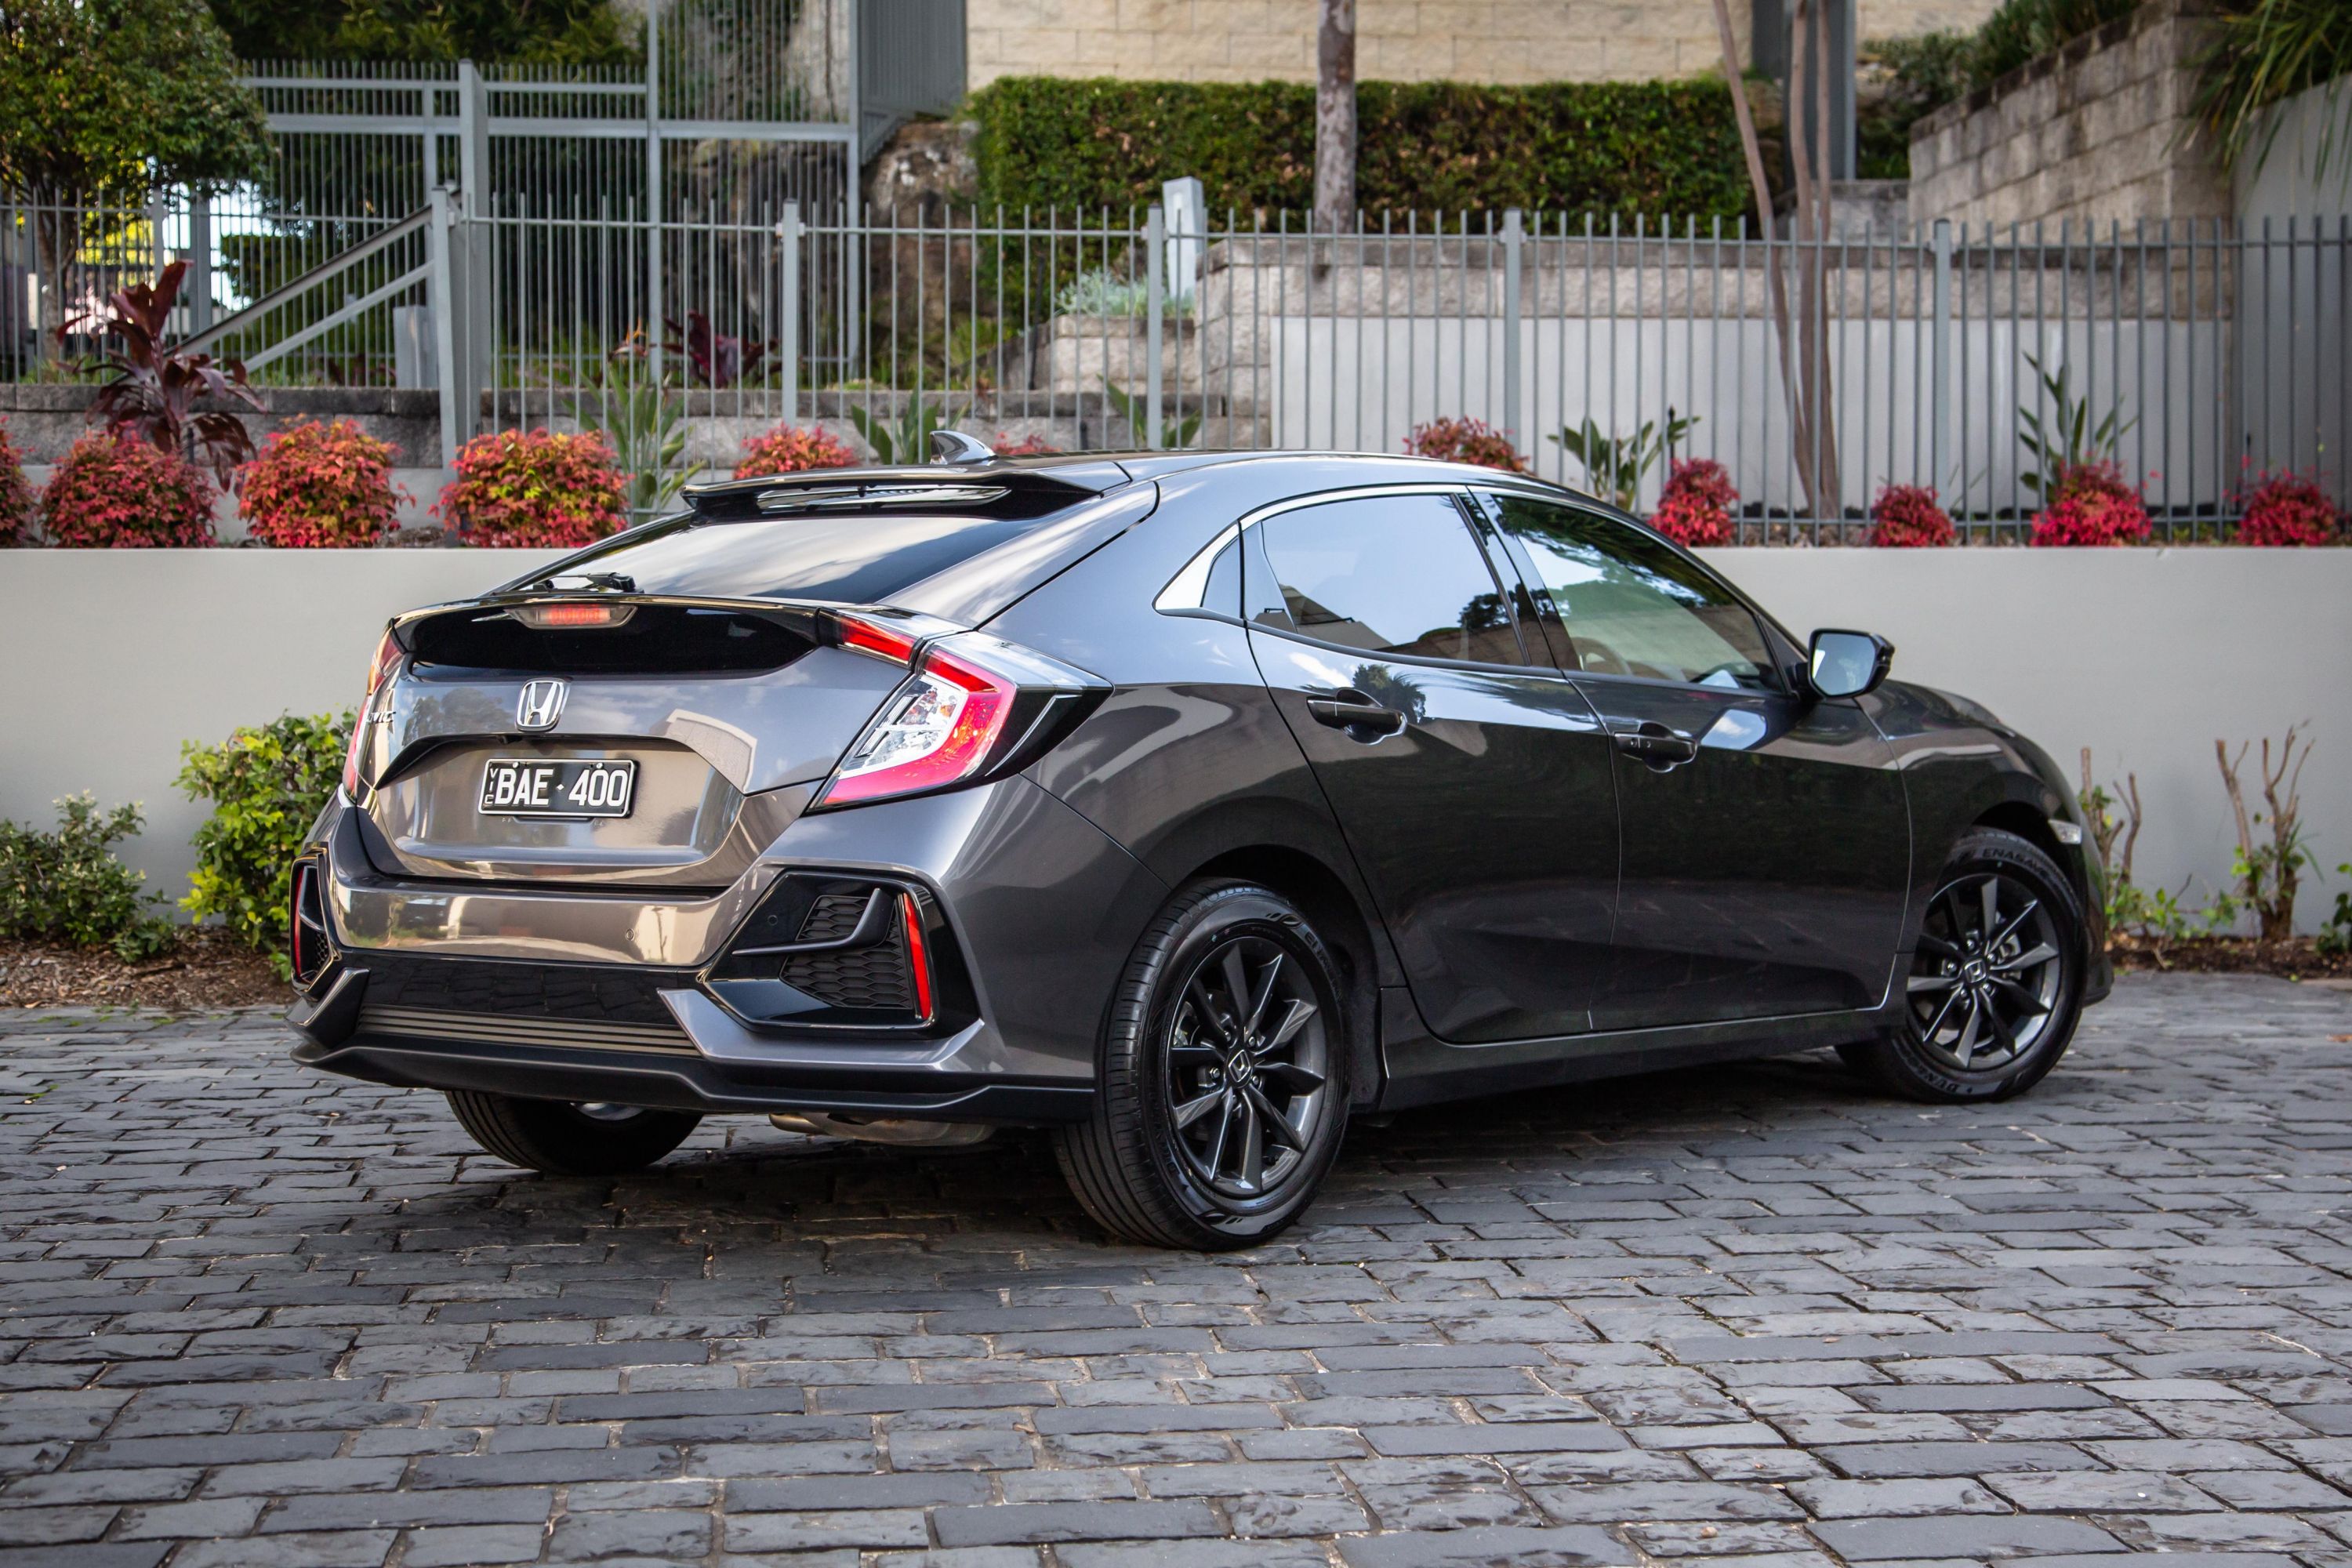 Learn about 74+ images honda civic hatchback dimensions In